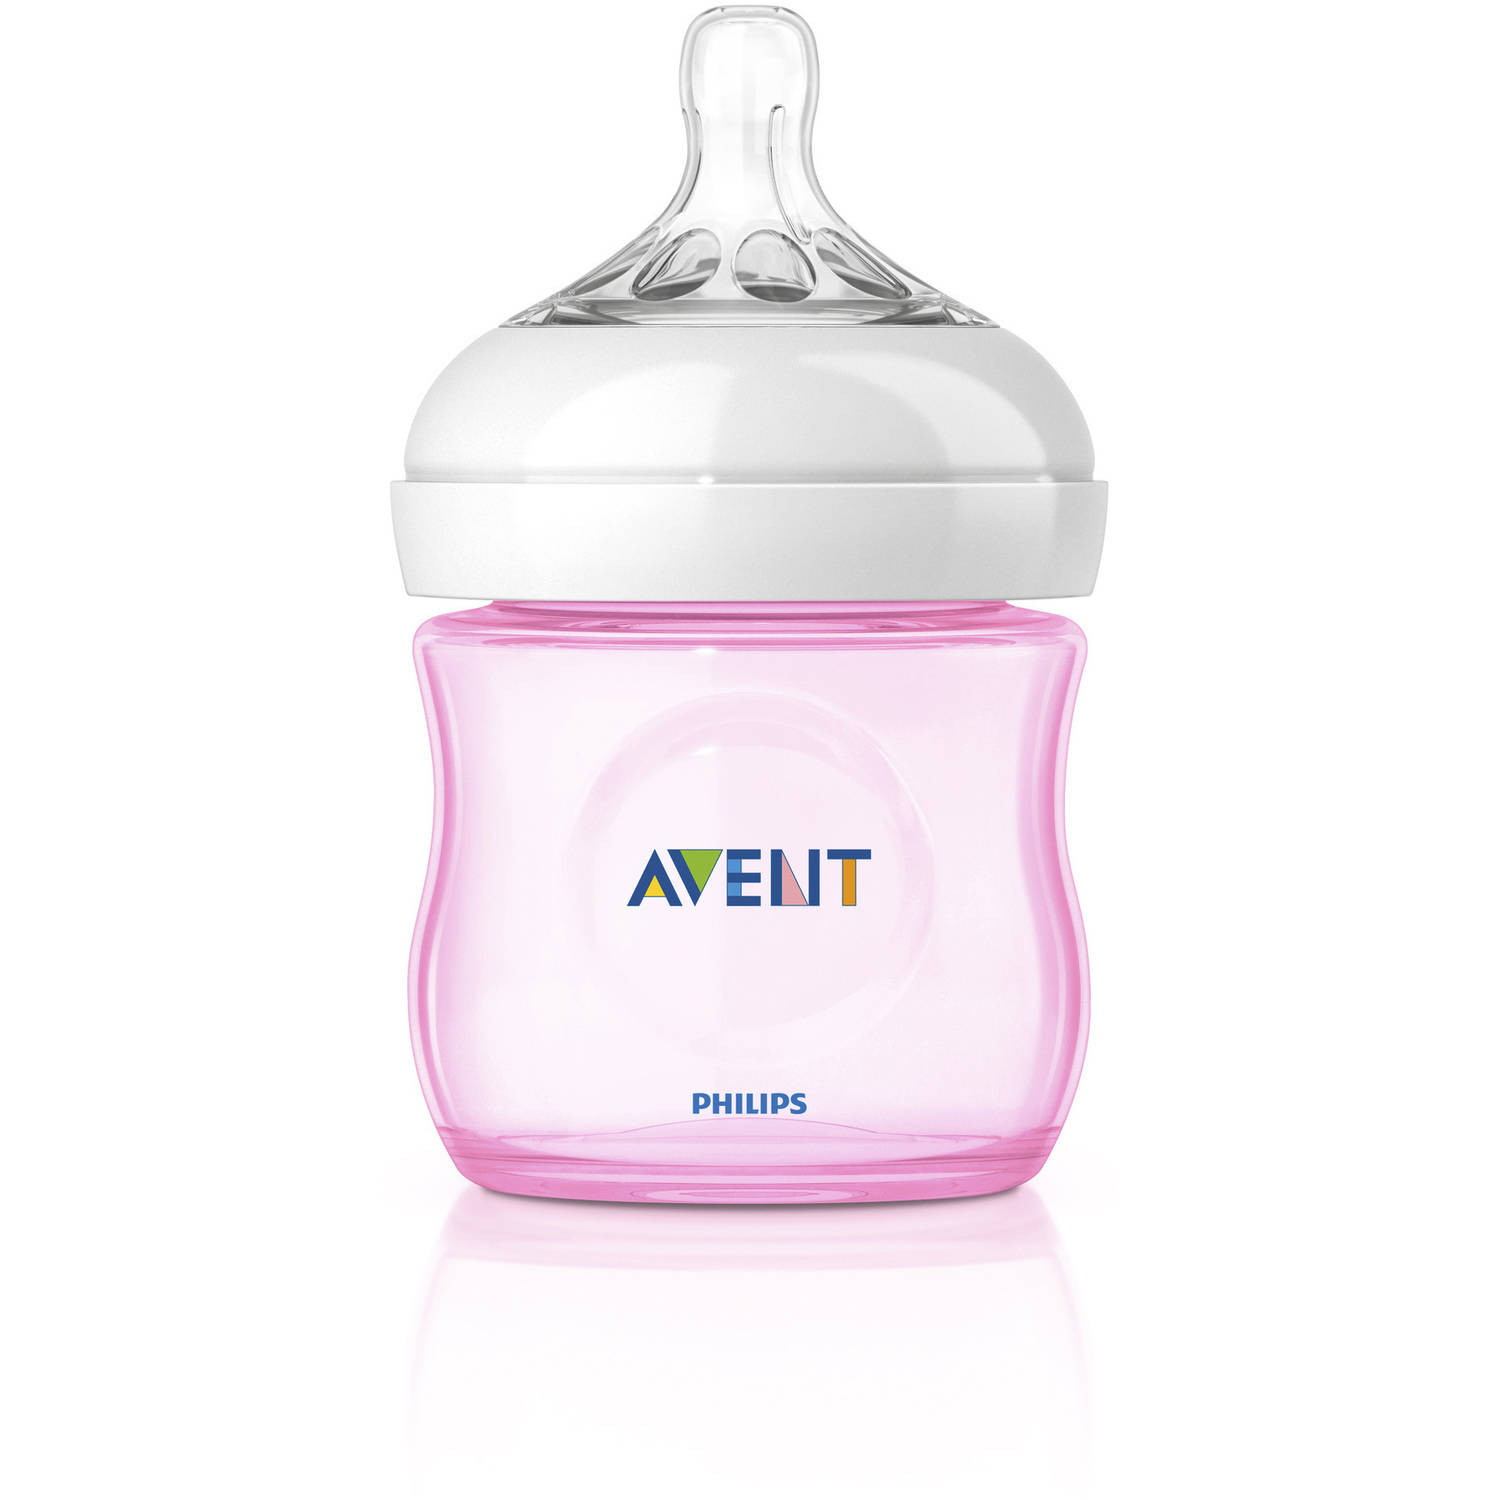 Avent 3-Pack Natural Bottles (4 oz.) - pink, one size - image 4 of 14